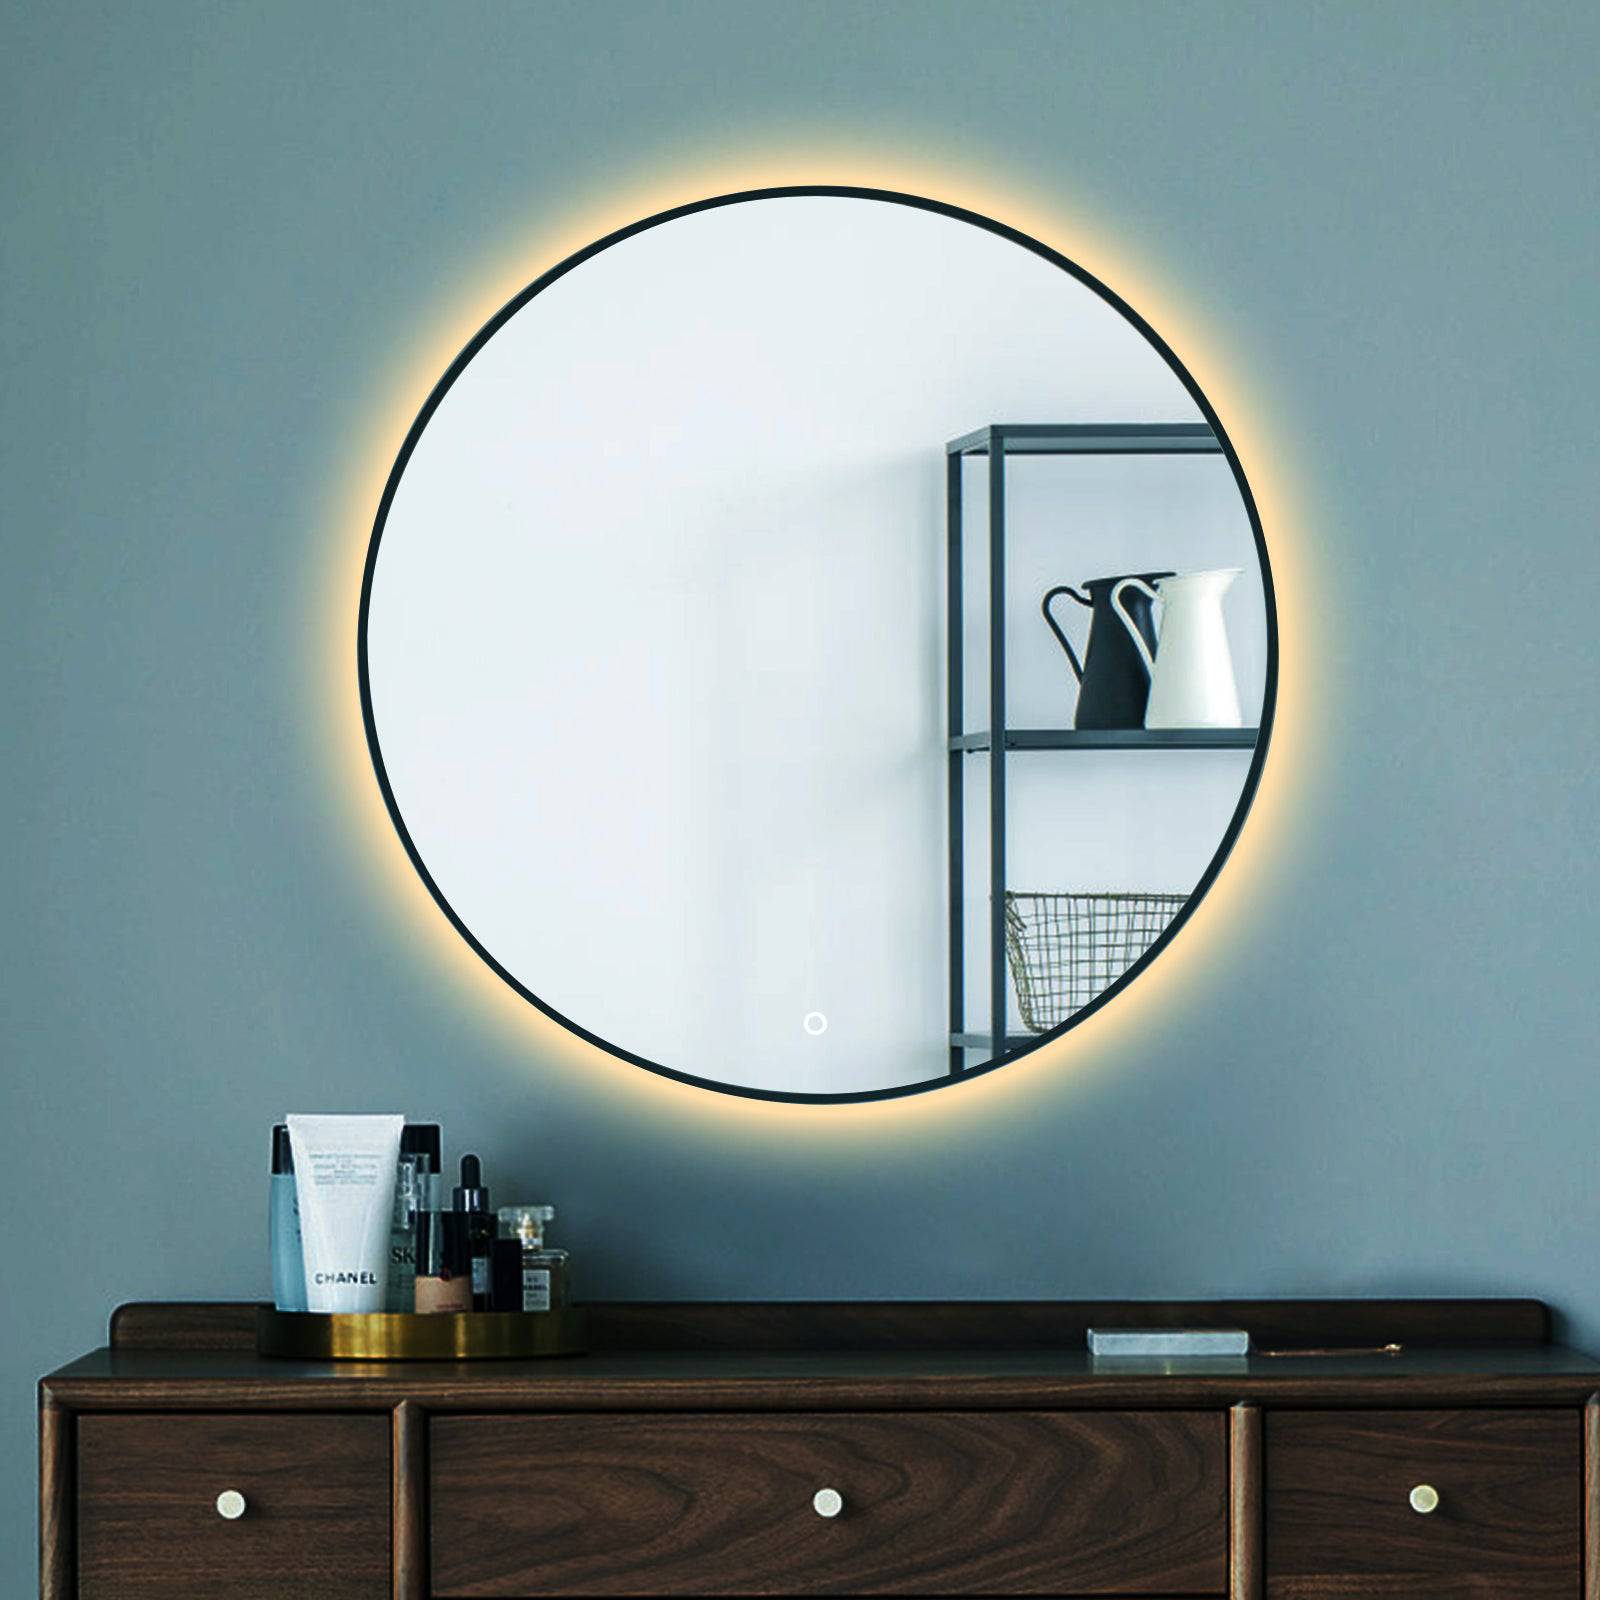 ELL Black Moon series - Modern LED Bathroom Mirror with Defogger and Adjustable Color Temperature - 5mm Copper-Free Glass, Matte Black Aluminum Frame, ETL Listed & IP44 Rated, Horizontal Mounting - Eco LED Lightings 